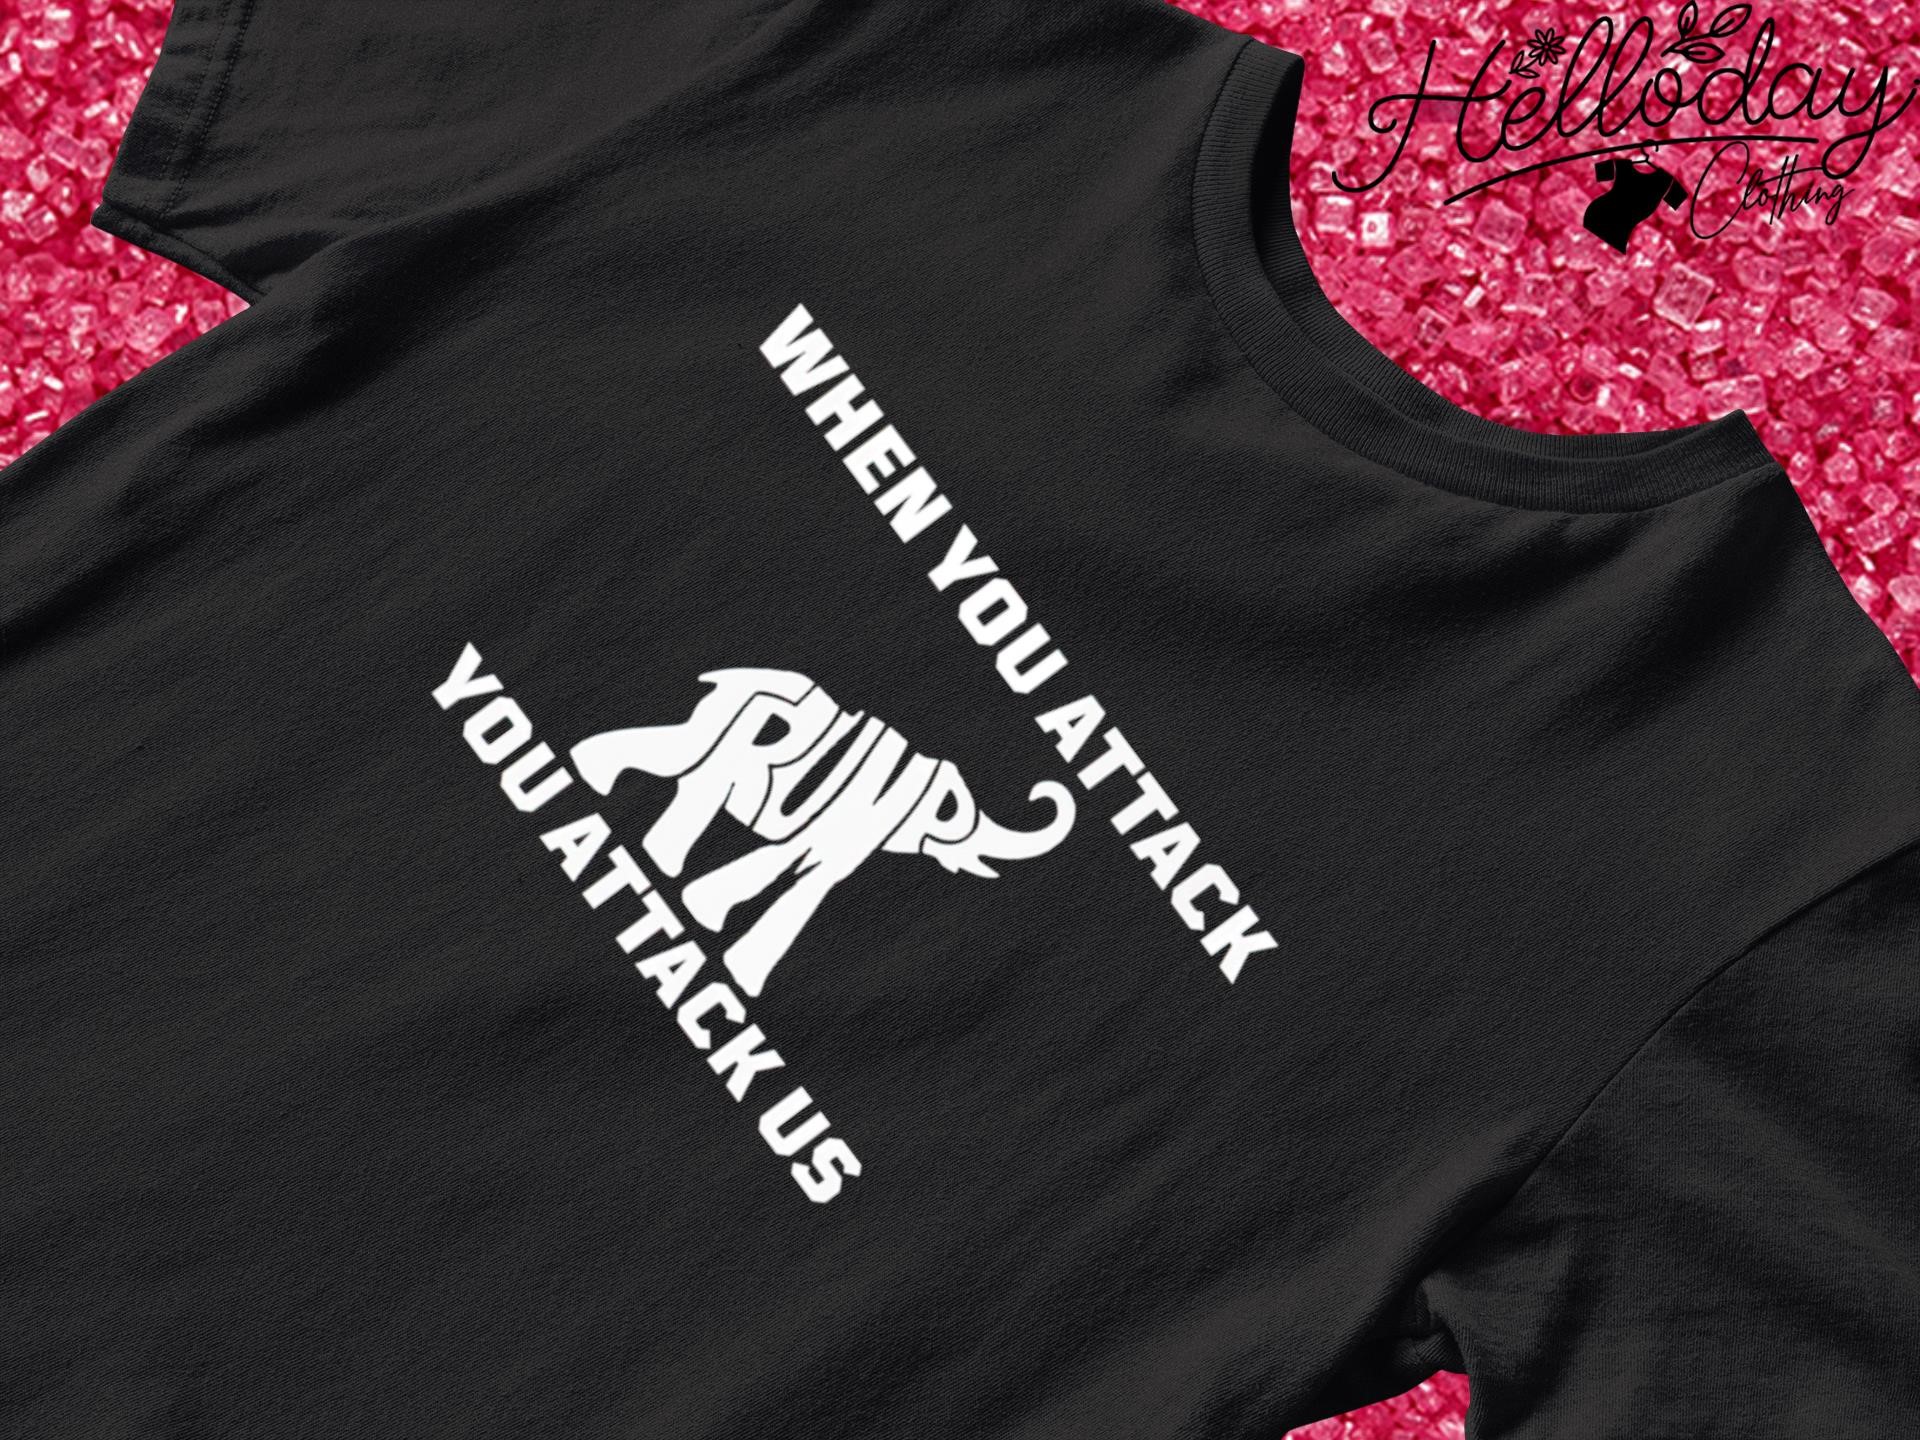 Elephant Trump when you attack you attack US shirt